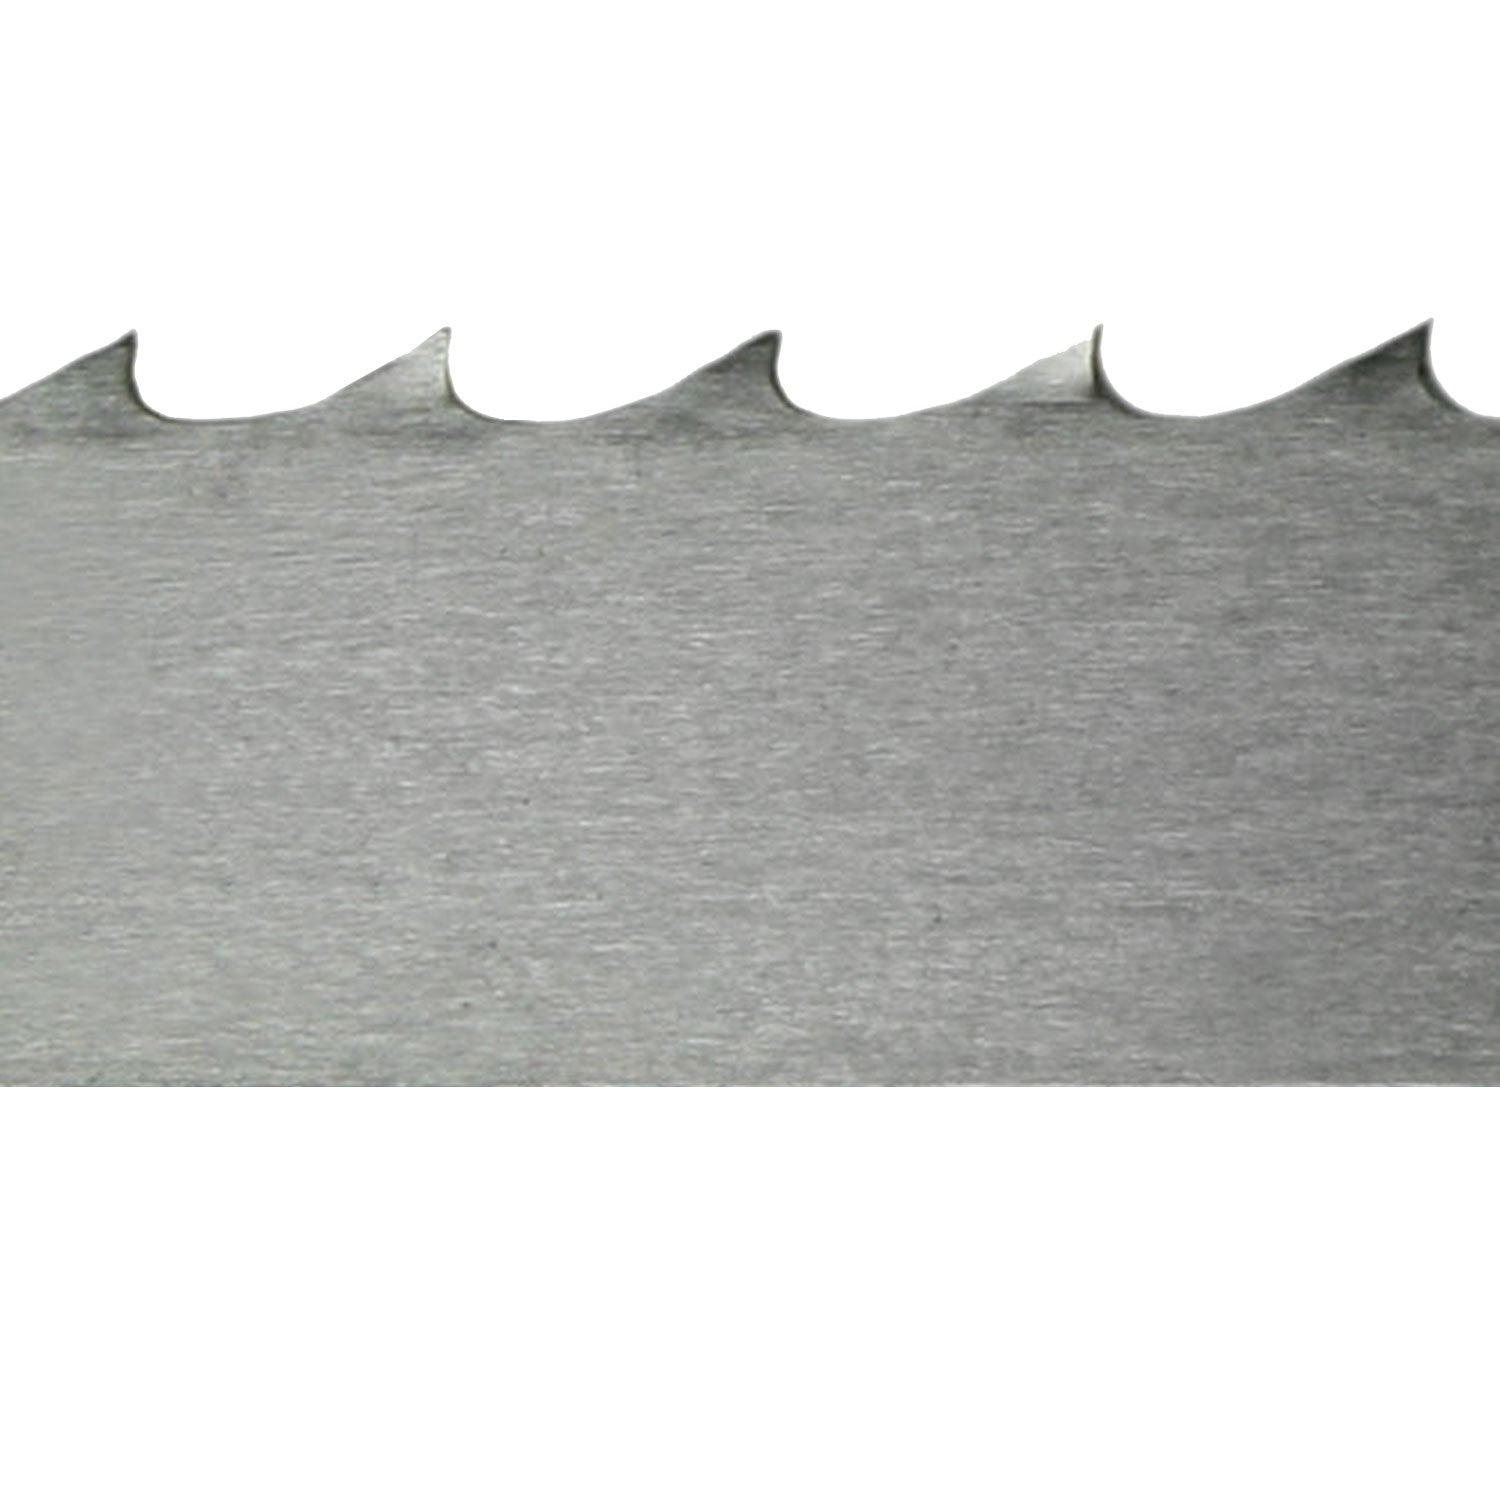 Meat Slicer Blades - Hook Tooth Edge - Made to fit Grasselli Machines - 435mm 5/8 in. x .022 in x 4TPI - Pack of 25